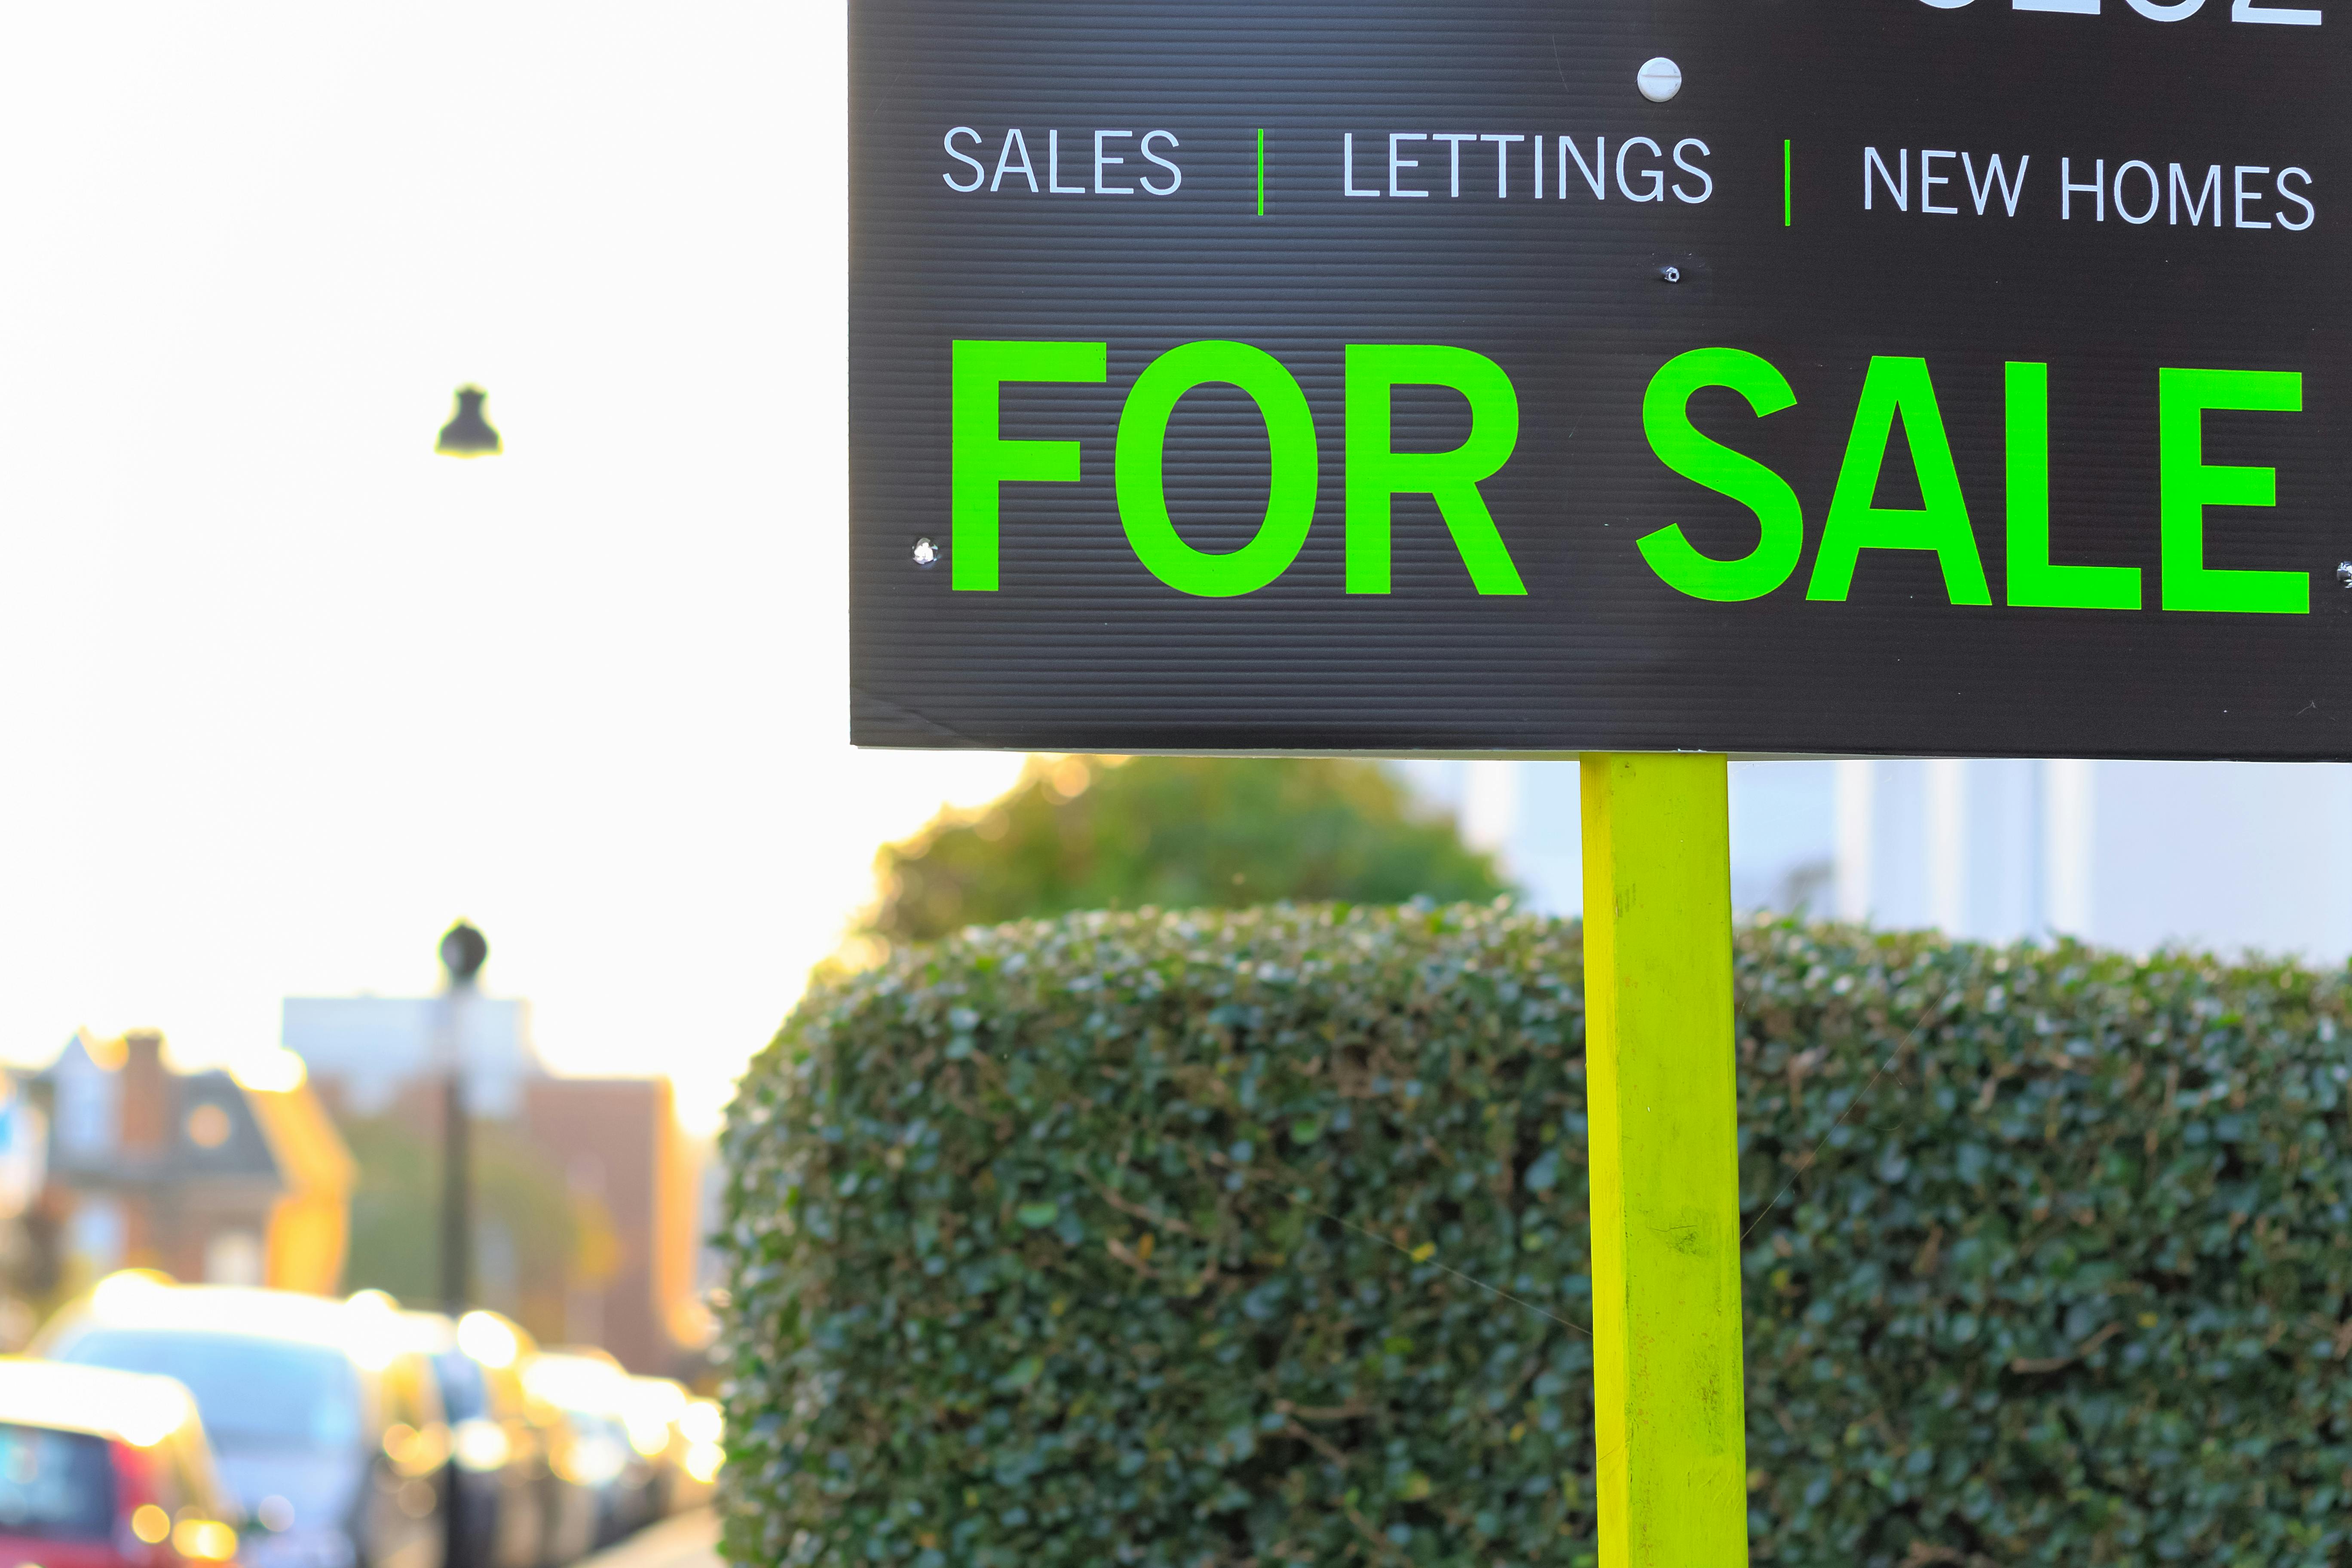 House prices for sale sign estate agent